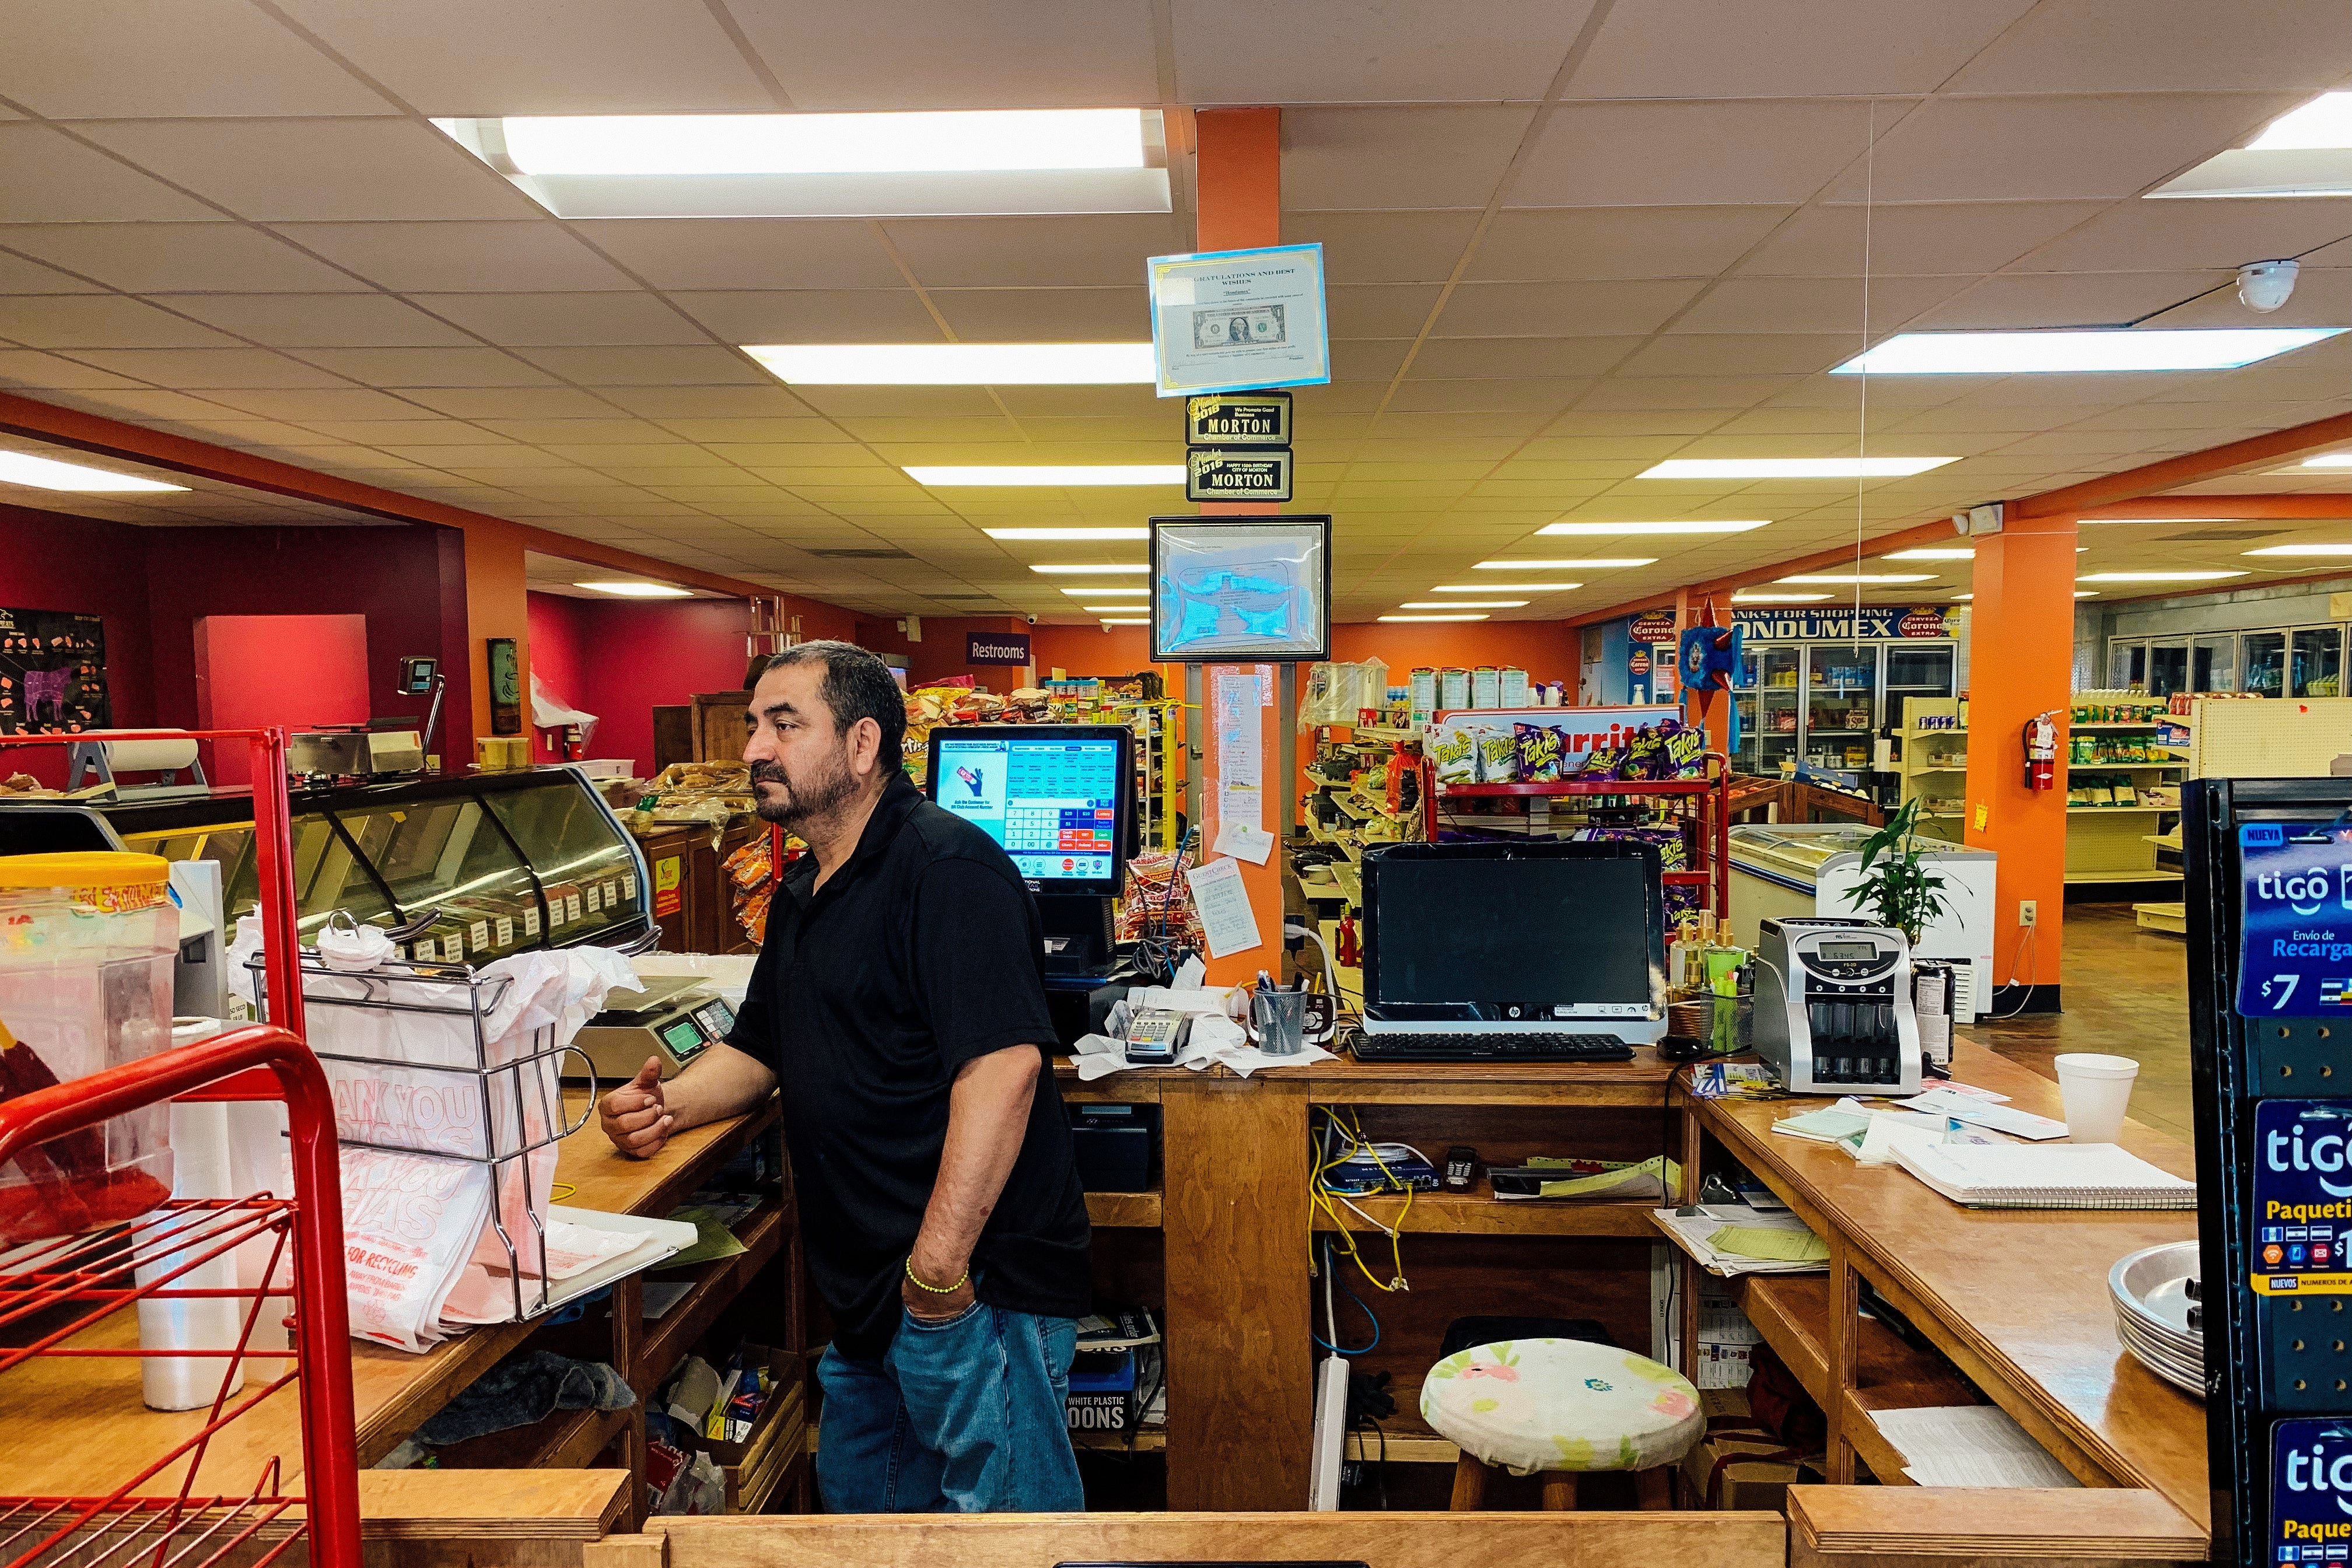 Juan Garcia stands at the register of his deserted grocery store.